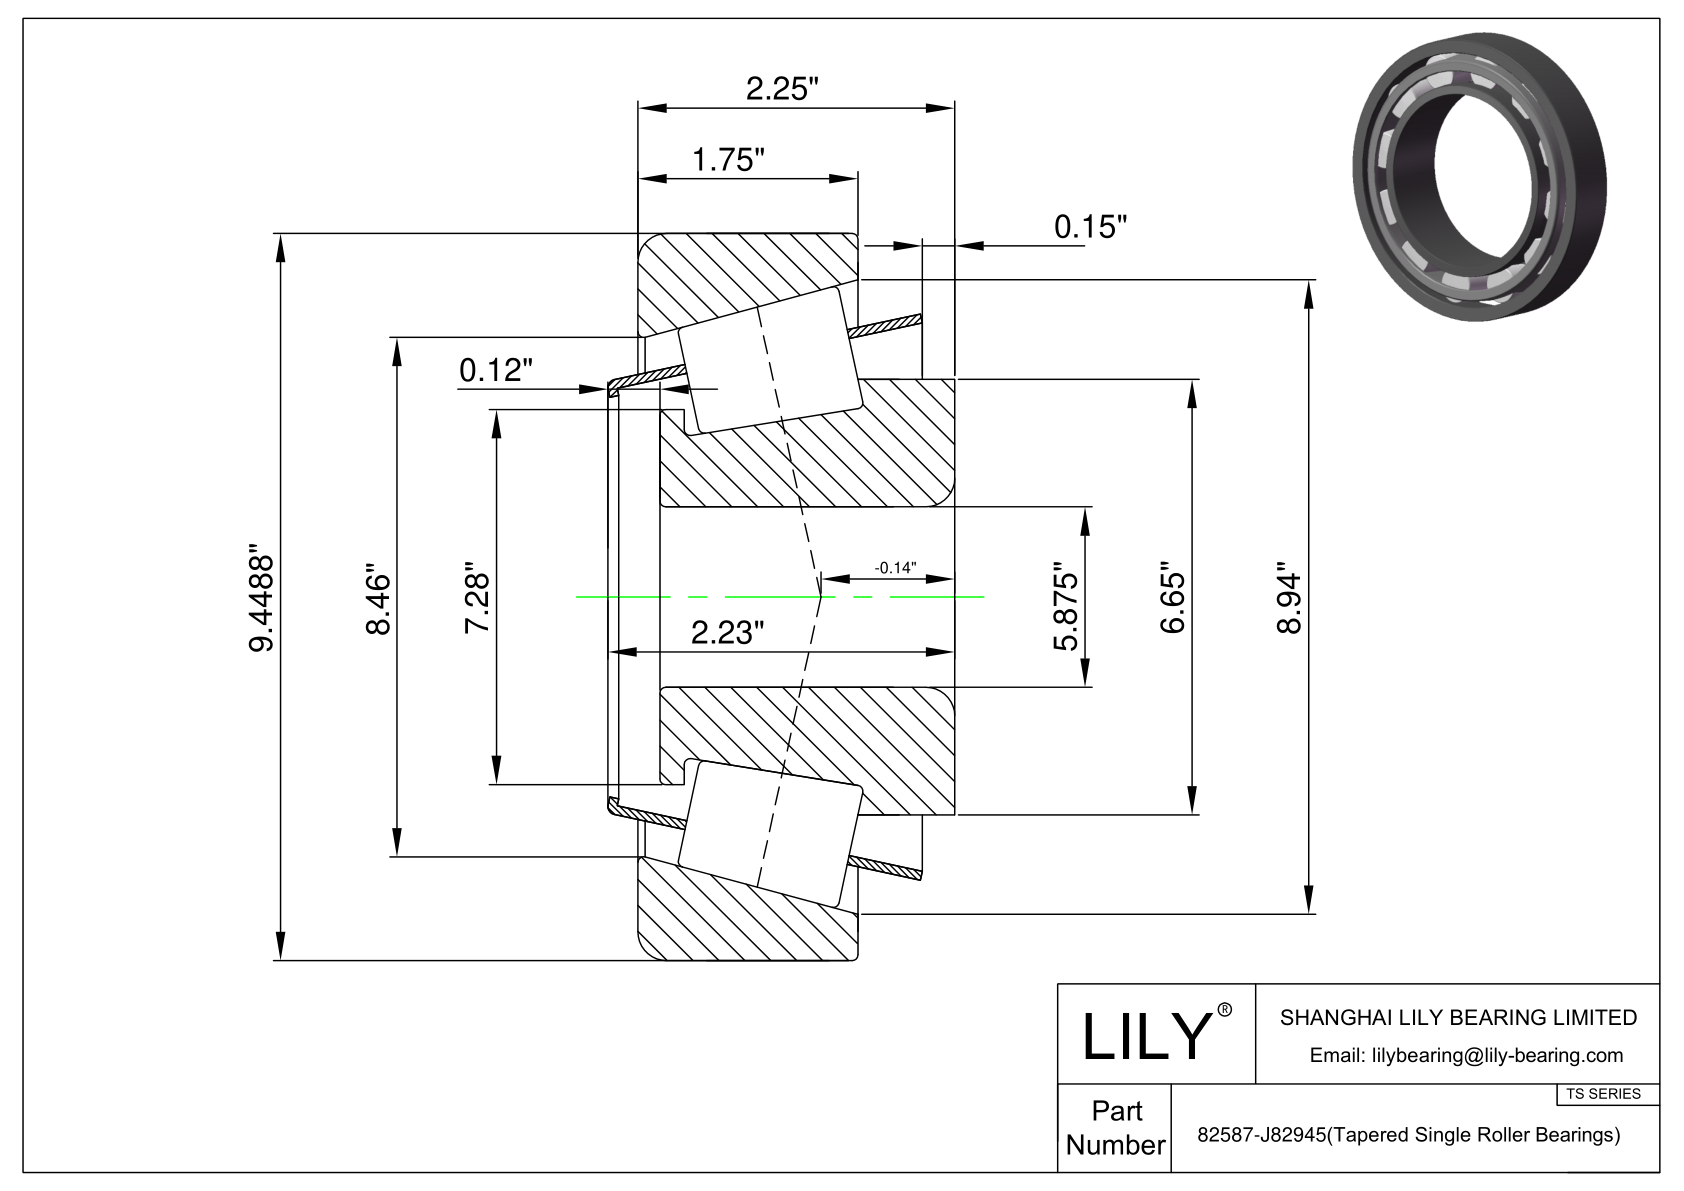 82587-J82945 TS (Tapered Single Roller Bearings) (Imperial) cad drawing